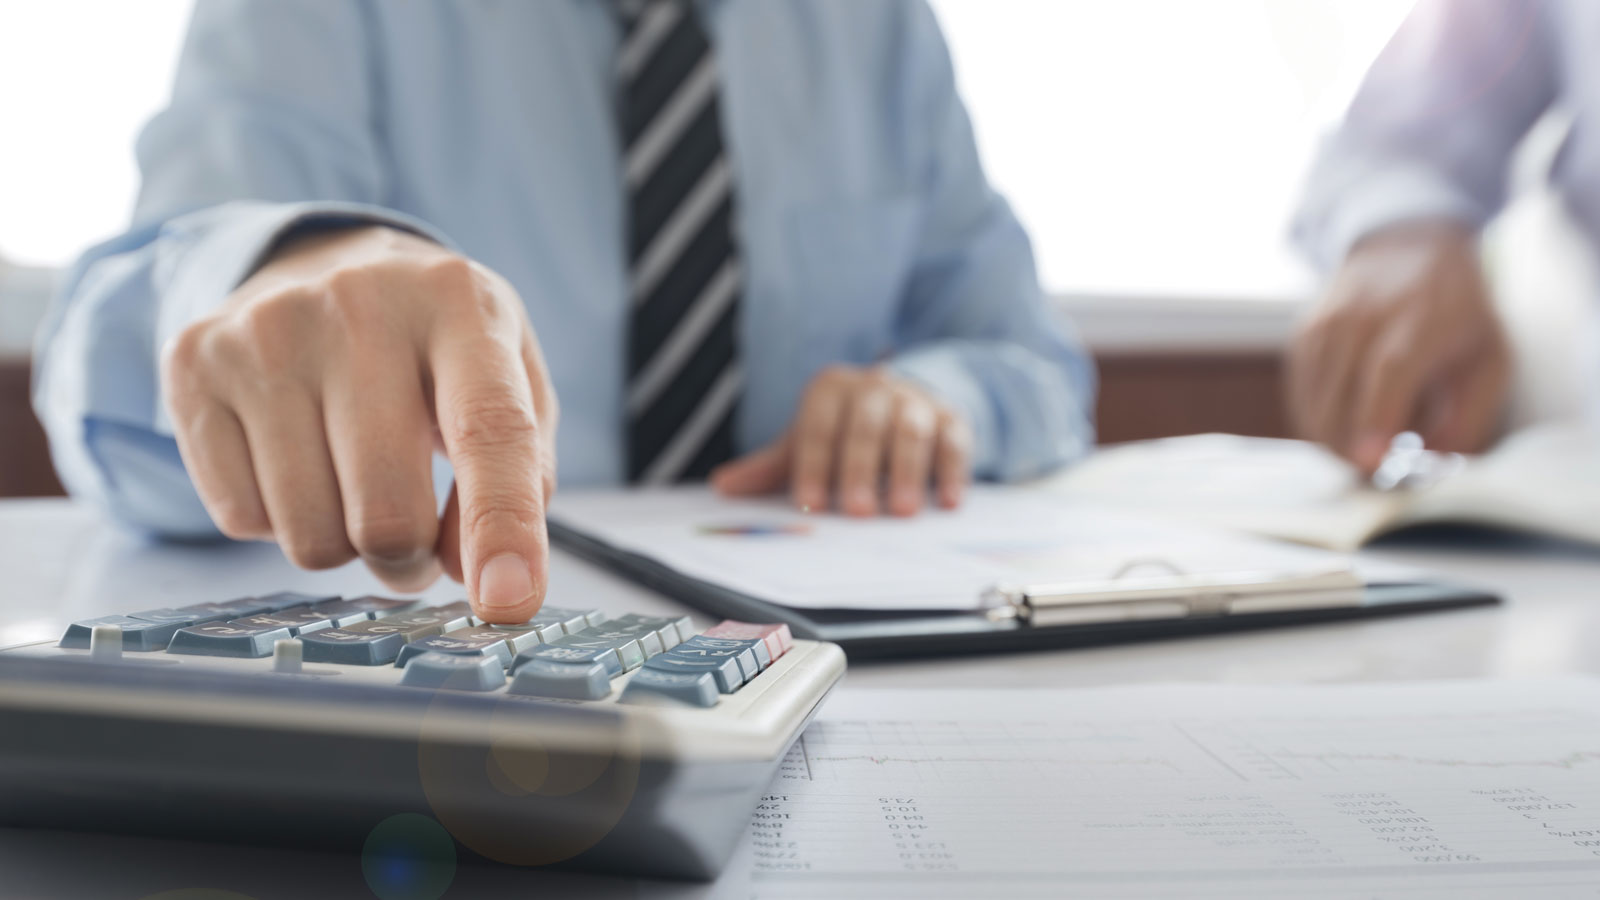 Man in tie working with a calculator and financial documents